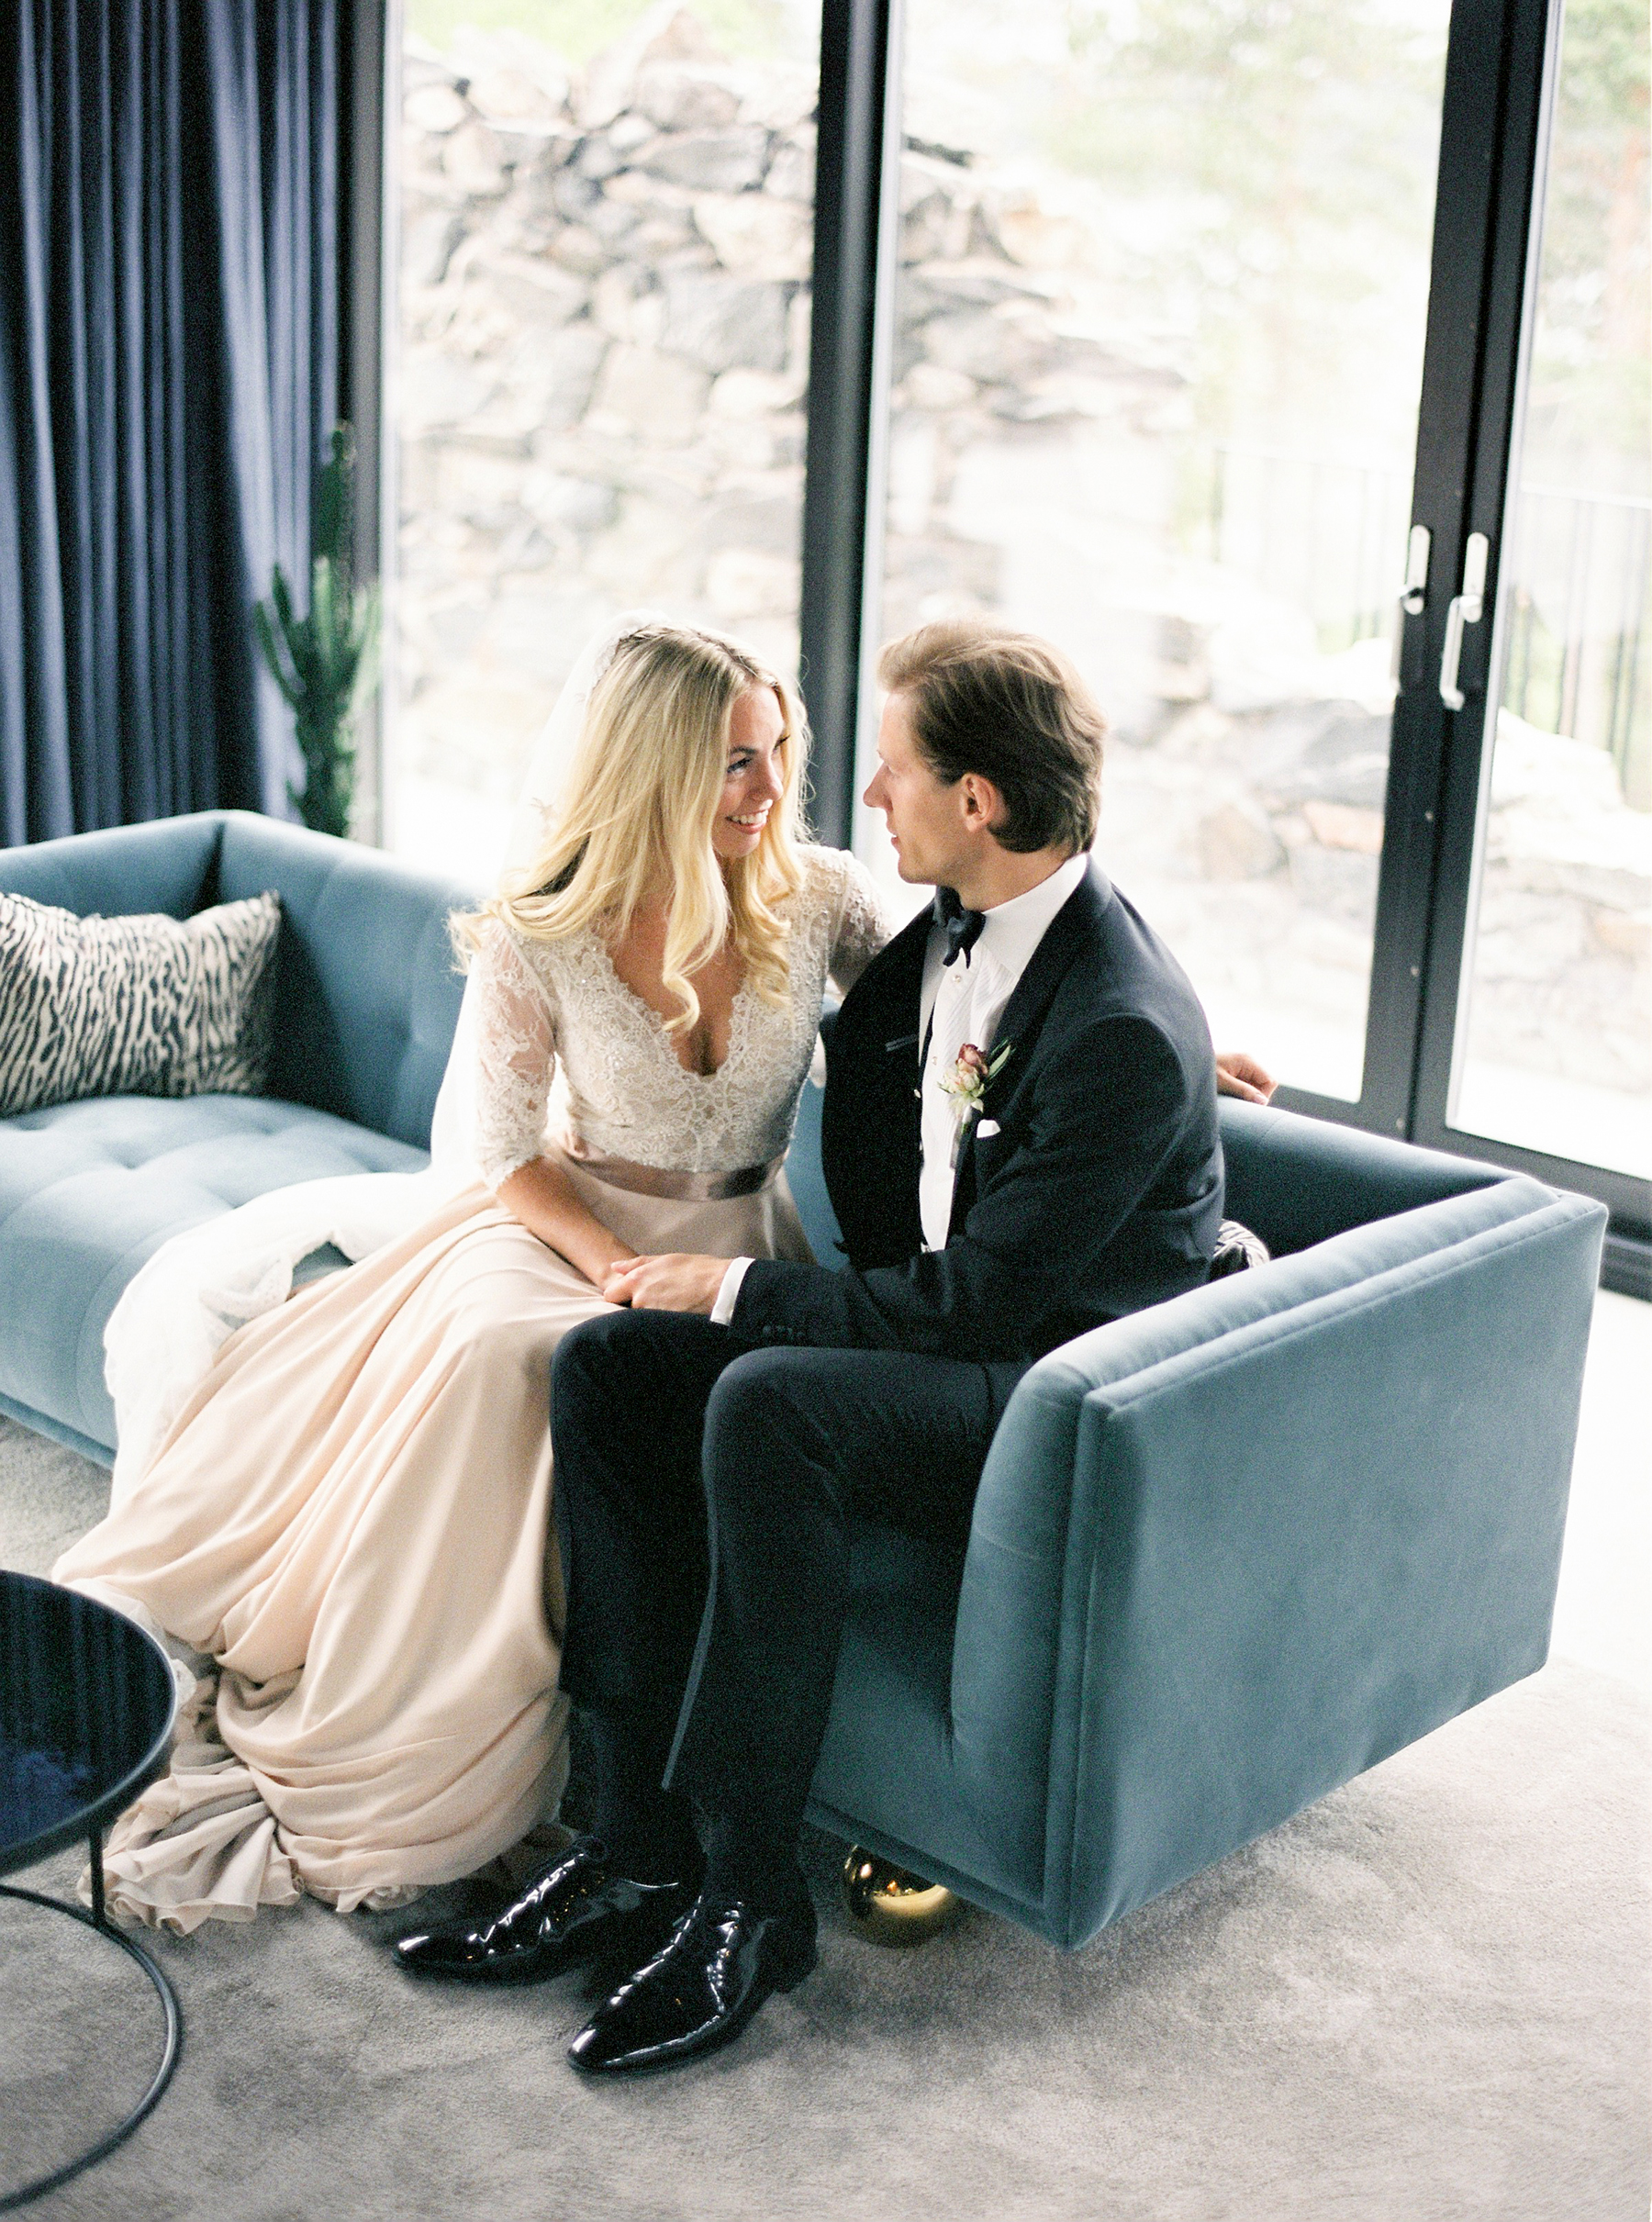 Bright and Warm Colored Wedding Inspiration in Sweden 2 Brides Photography55